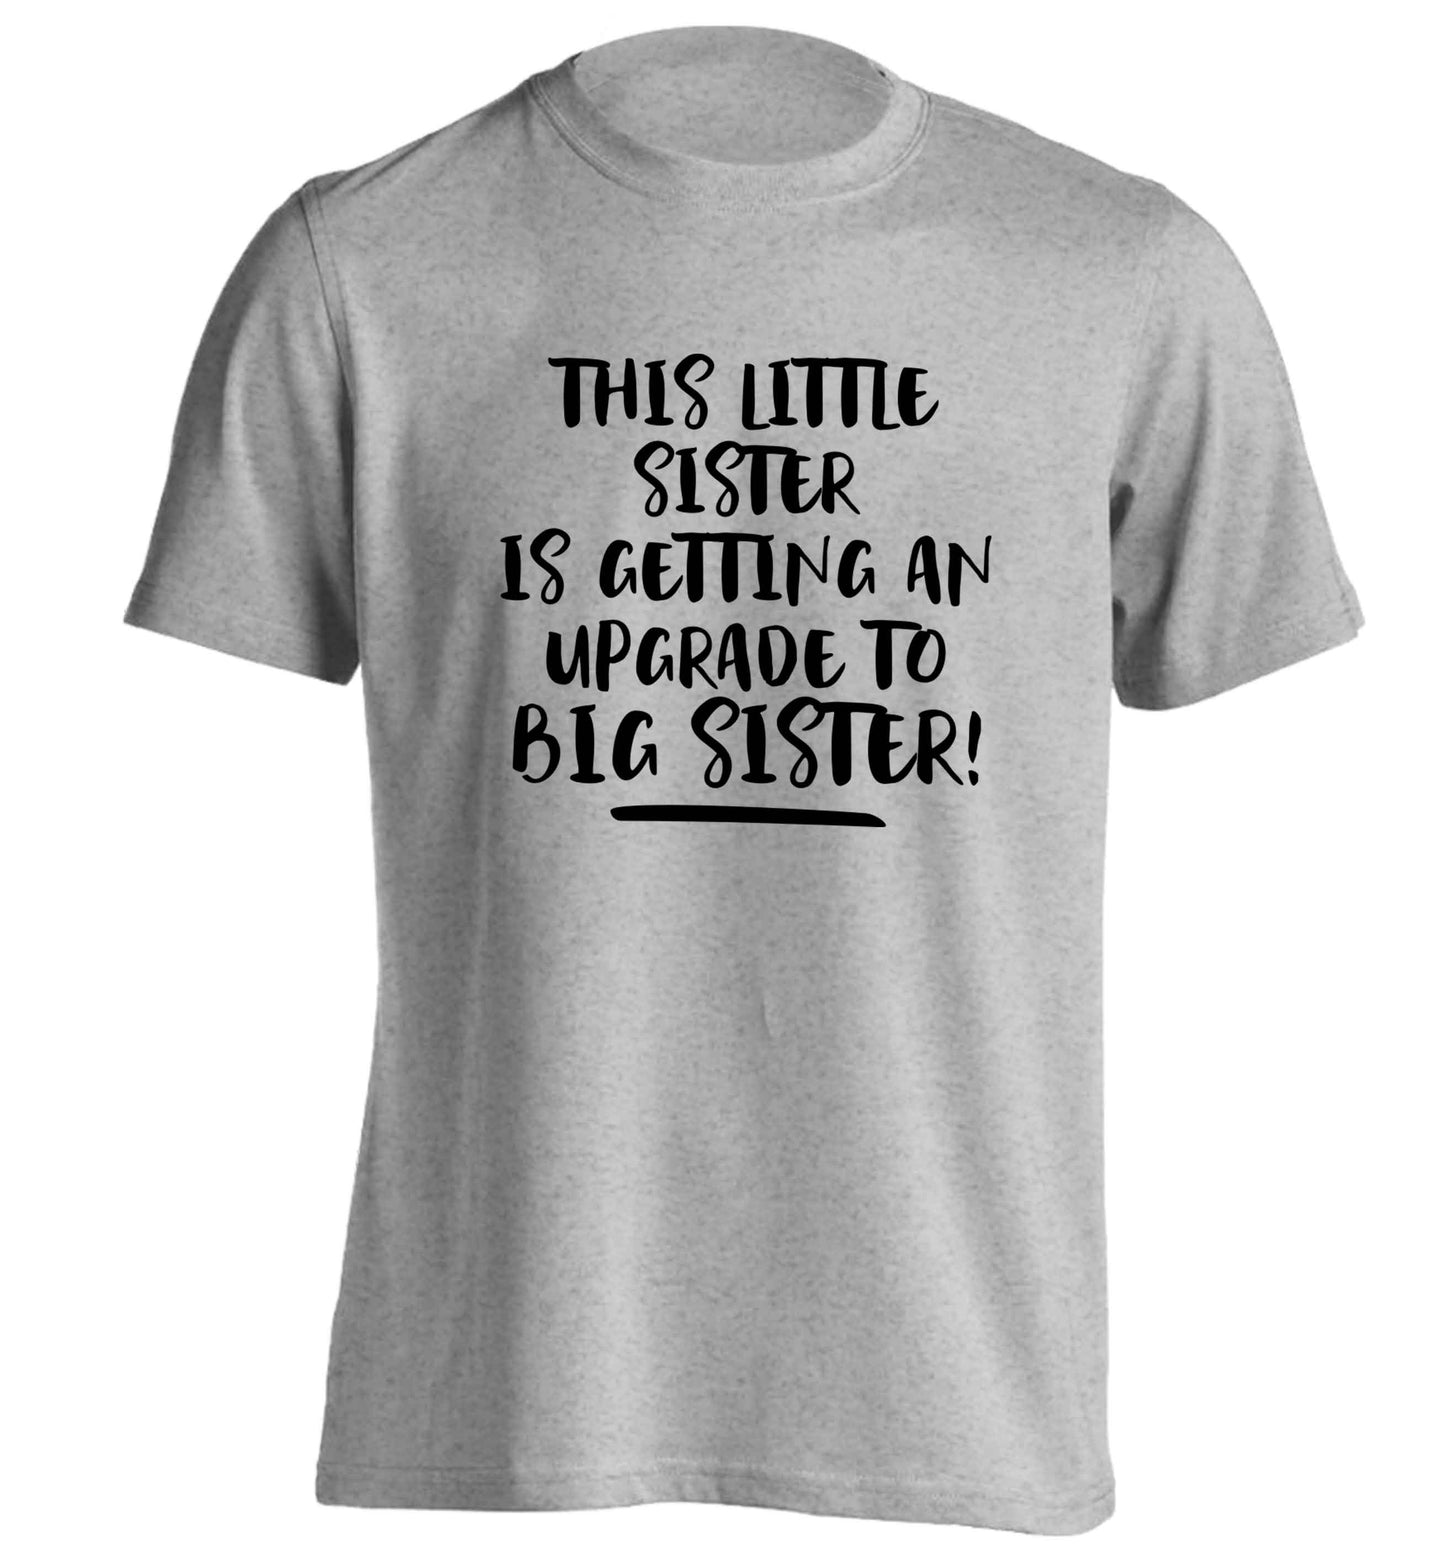 This little sister is getting an upgrade to big sister! adults unisex grey Tshirt 2XL